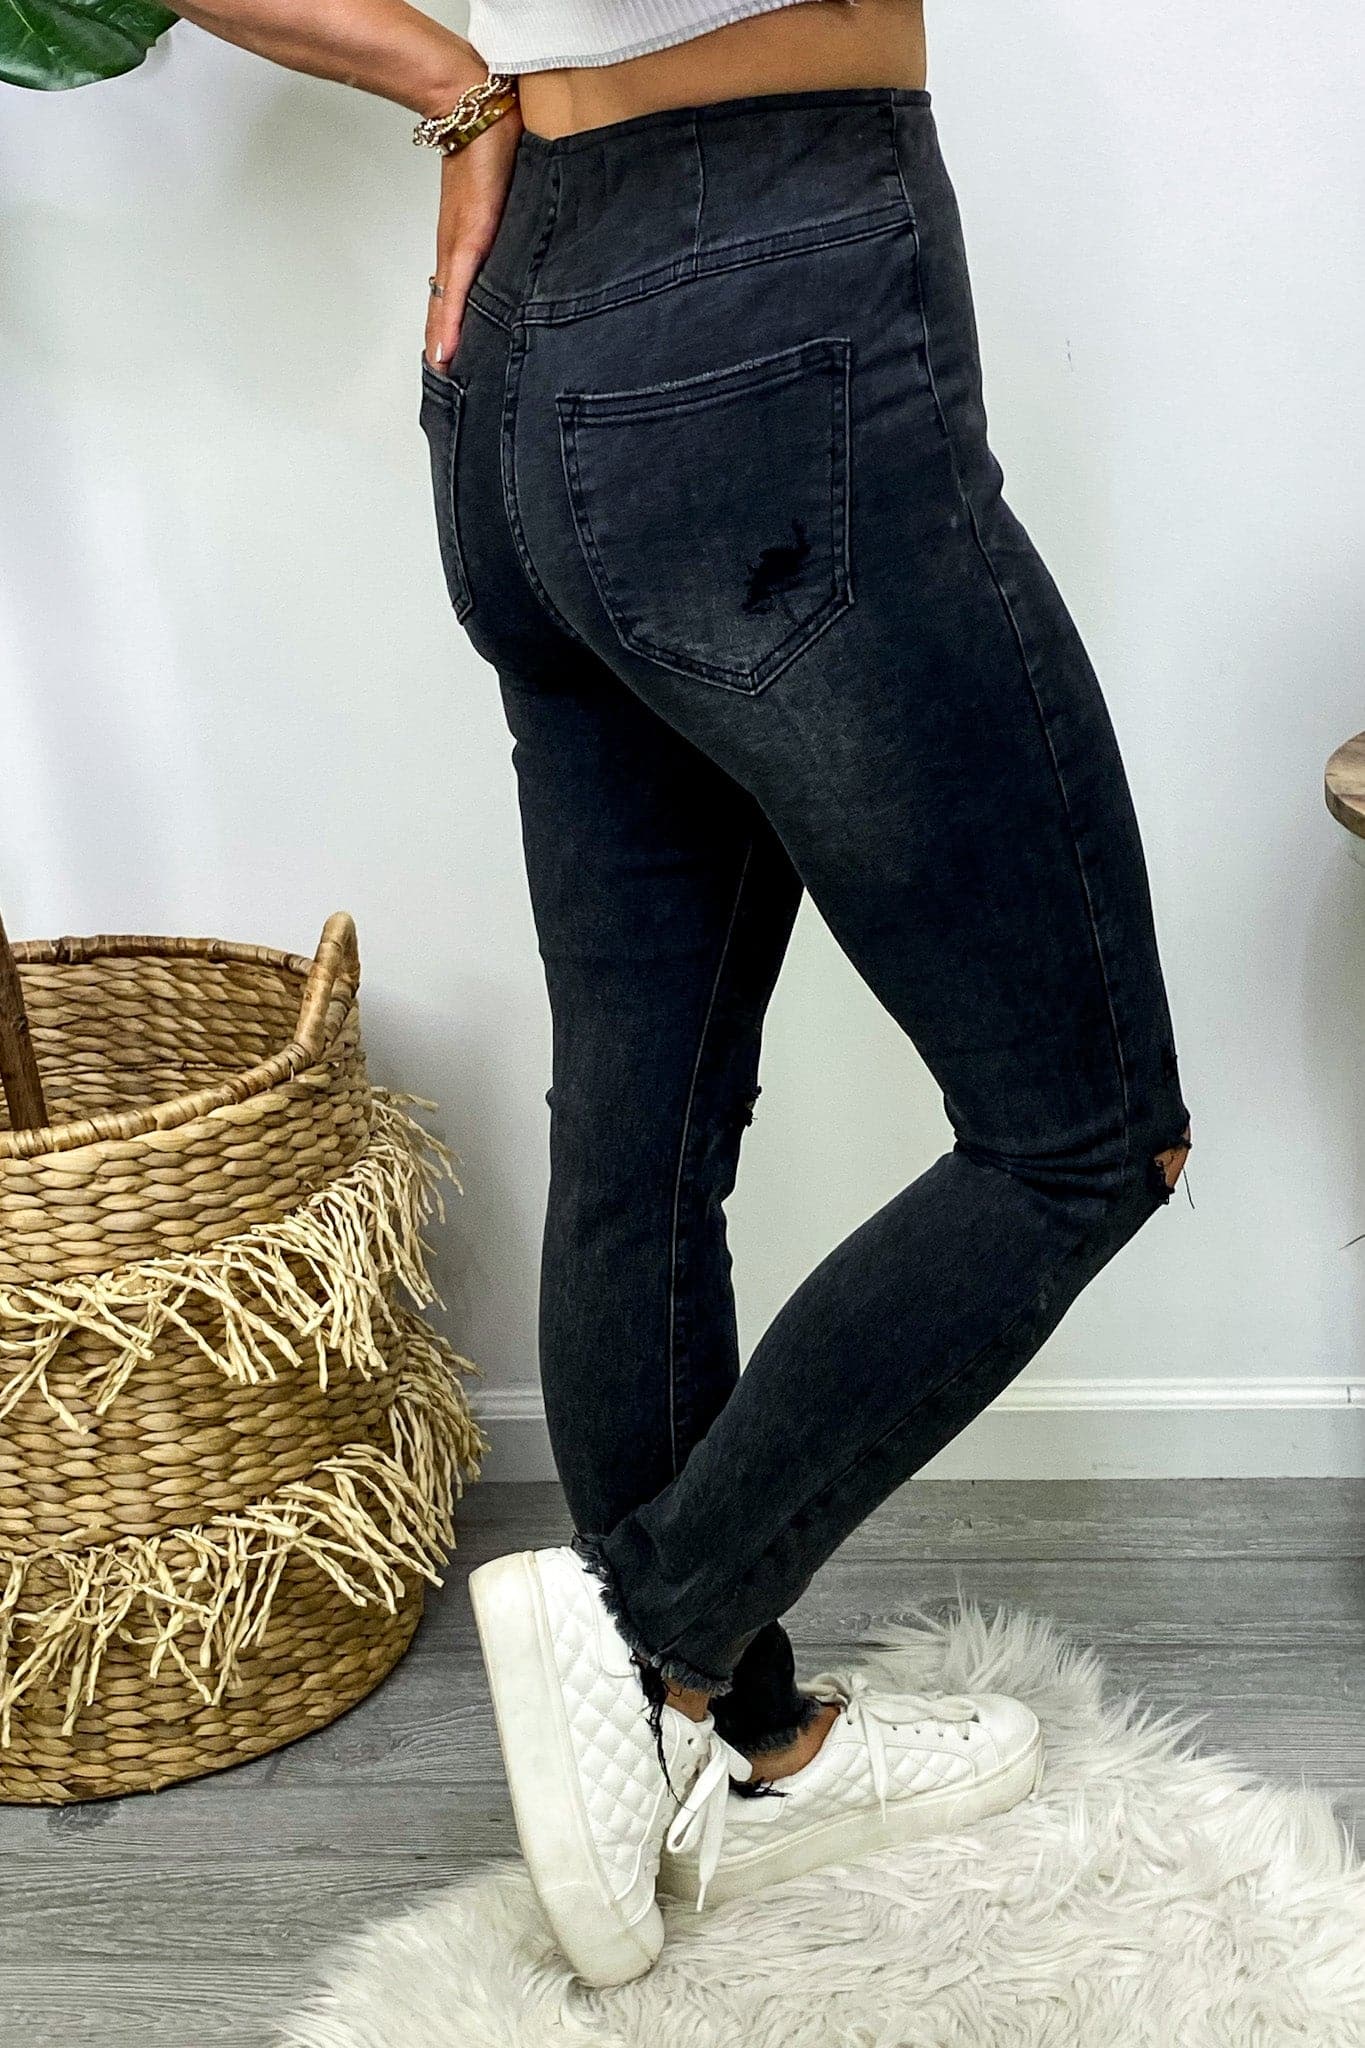  Barden Pull On Distressed Skinny Jeans - FINAL SALE - Madison and Mallory